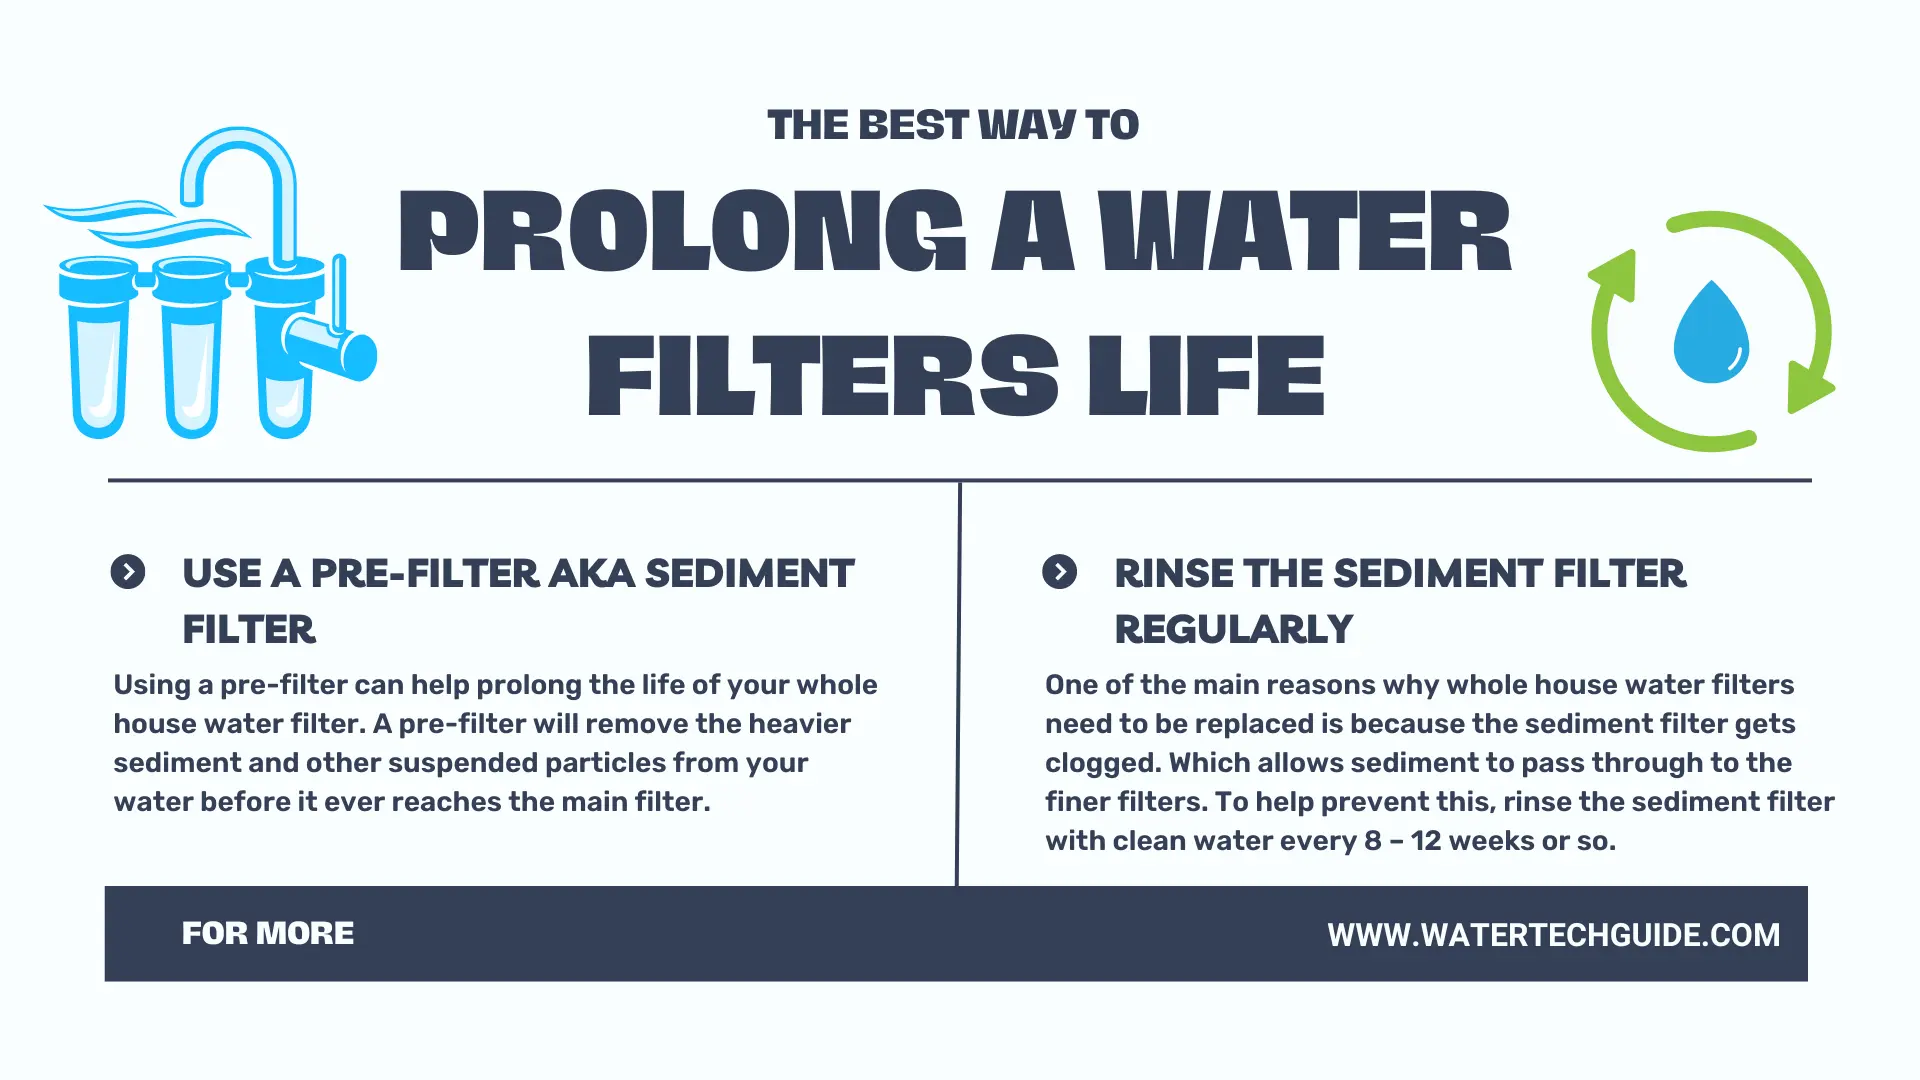 The Best Way to Prolong a Water Filters Life